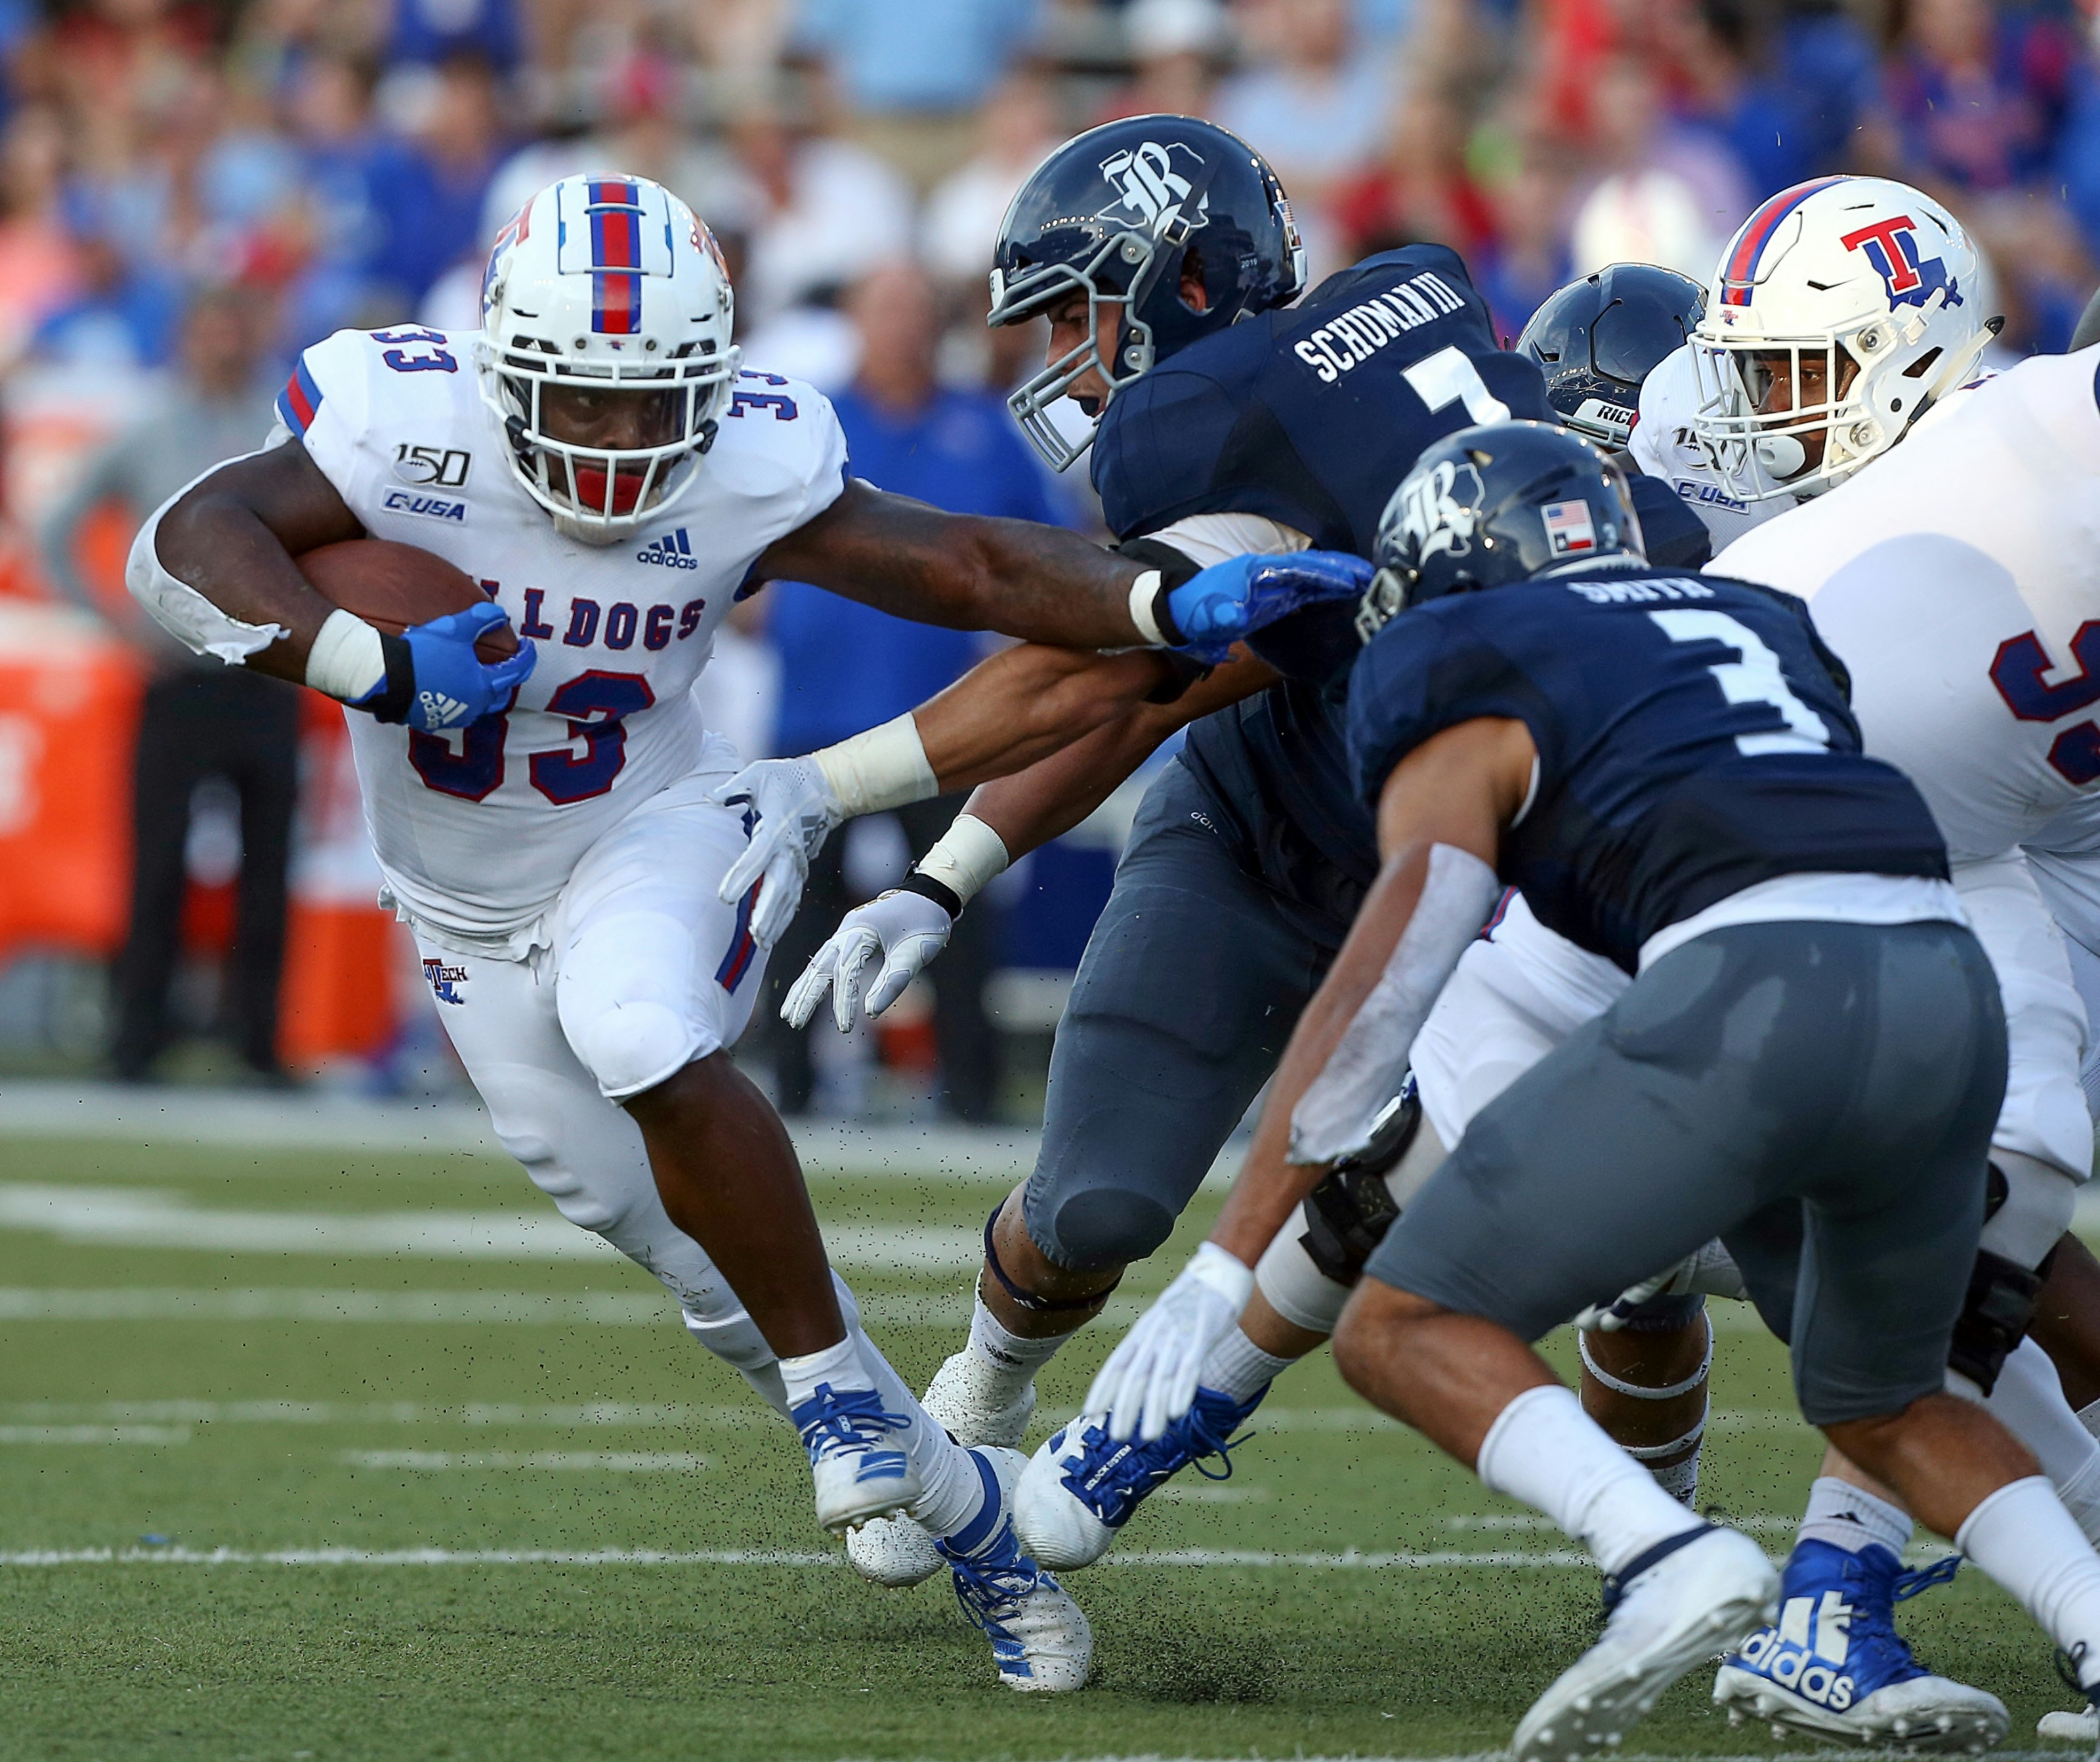 Louisiana Tech football aiming for seventh straight bowl victory in 2020 - Page 2